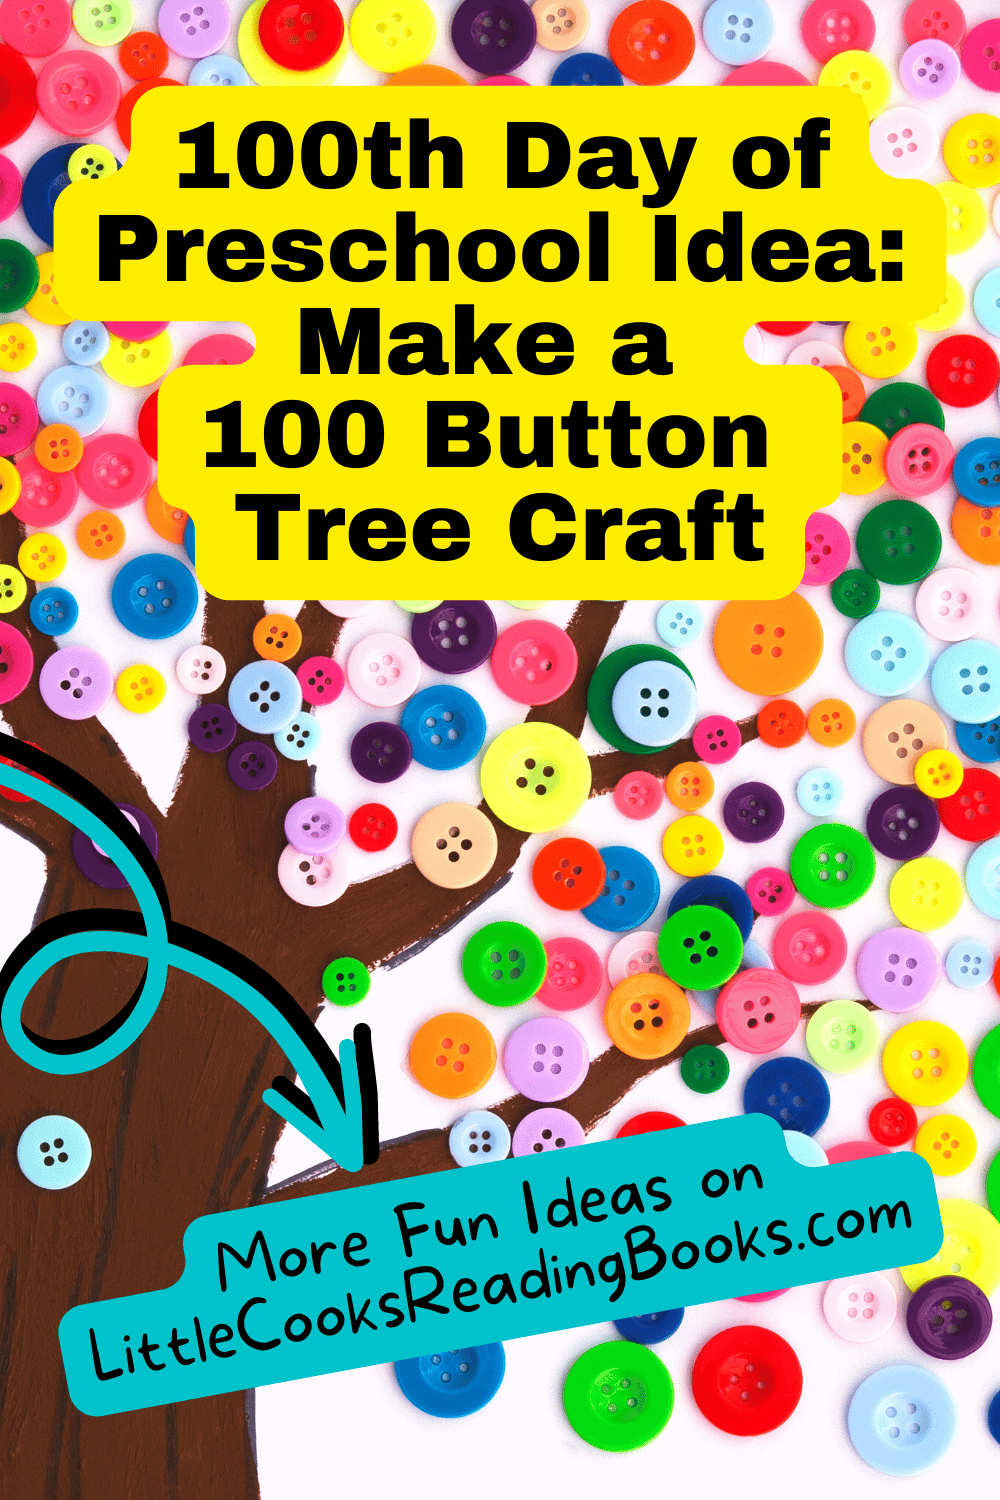 Pre k 100 day activities - make a 100 object craft tree